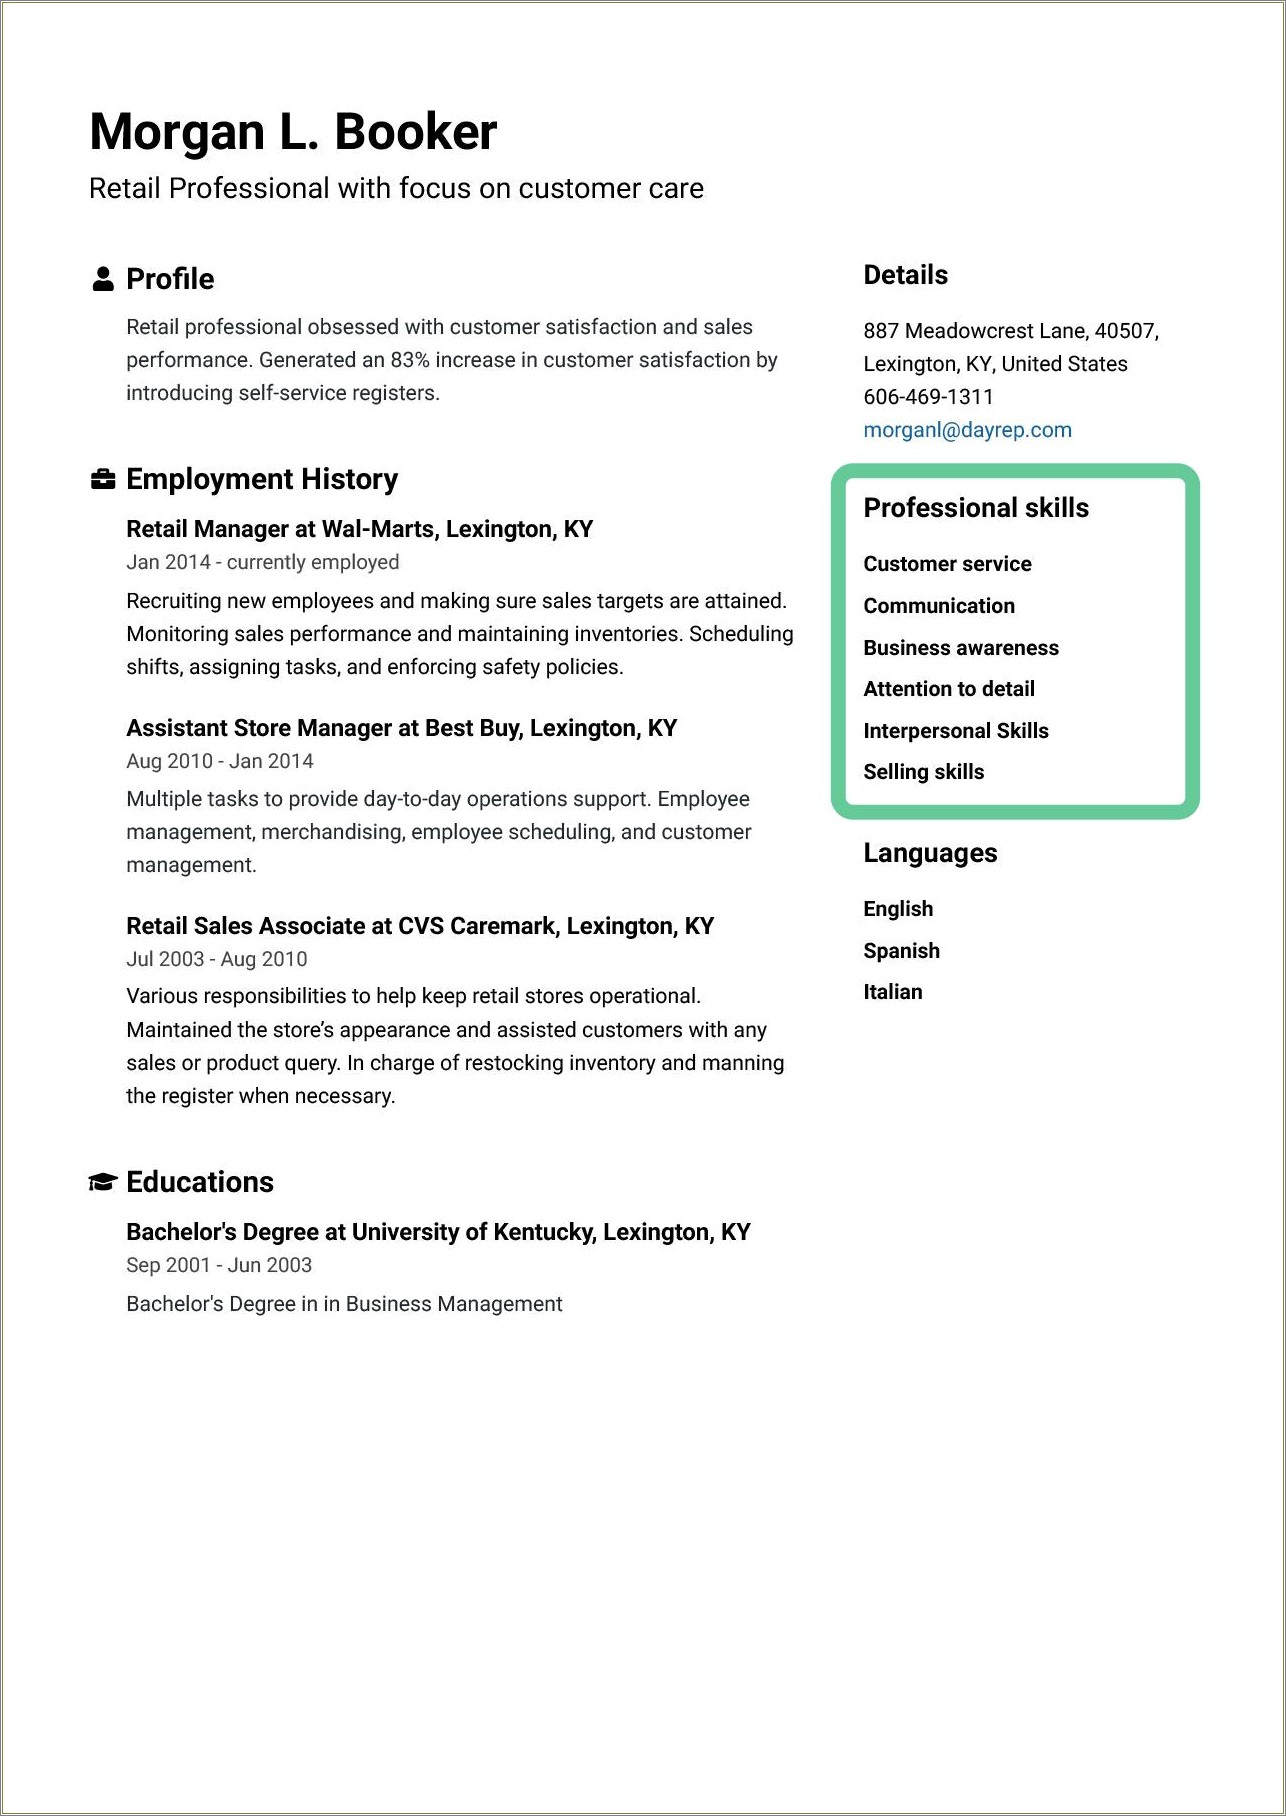 Highlight Or Skill Proficiency For Resume